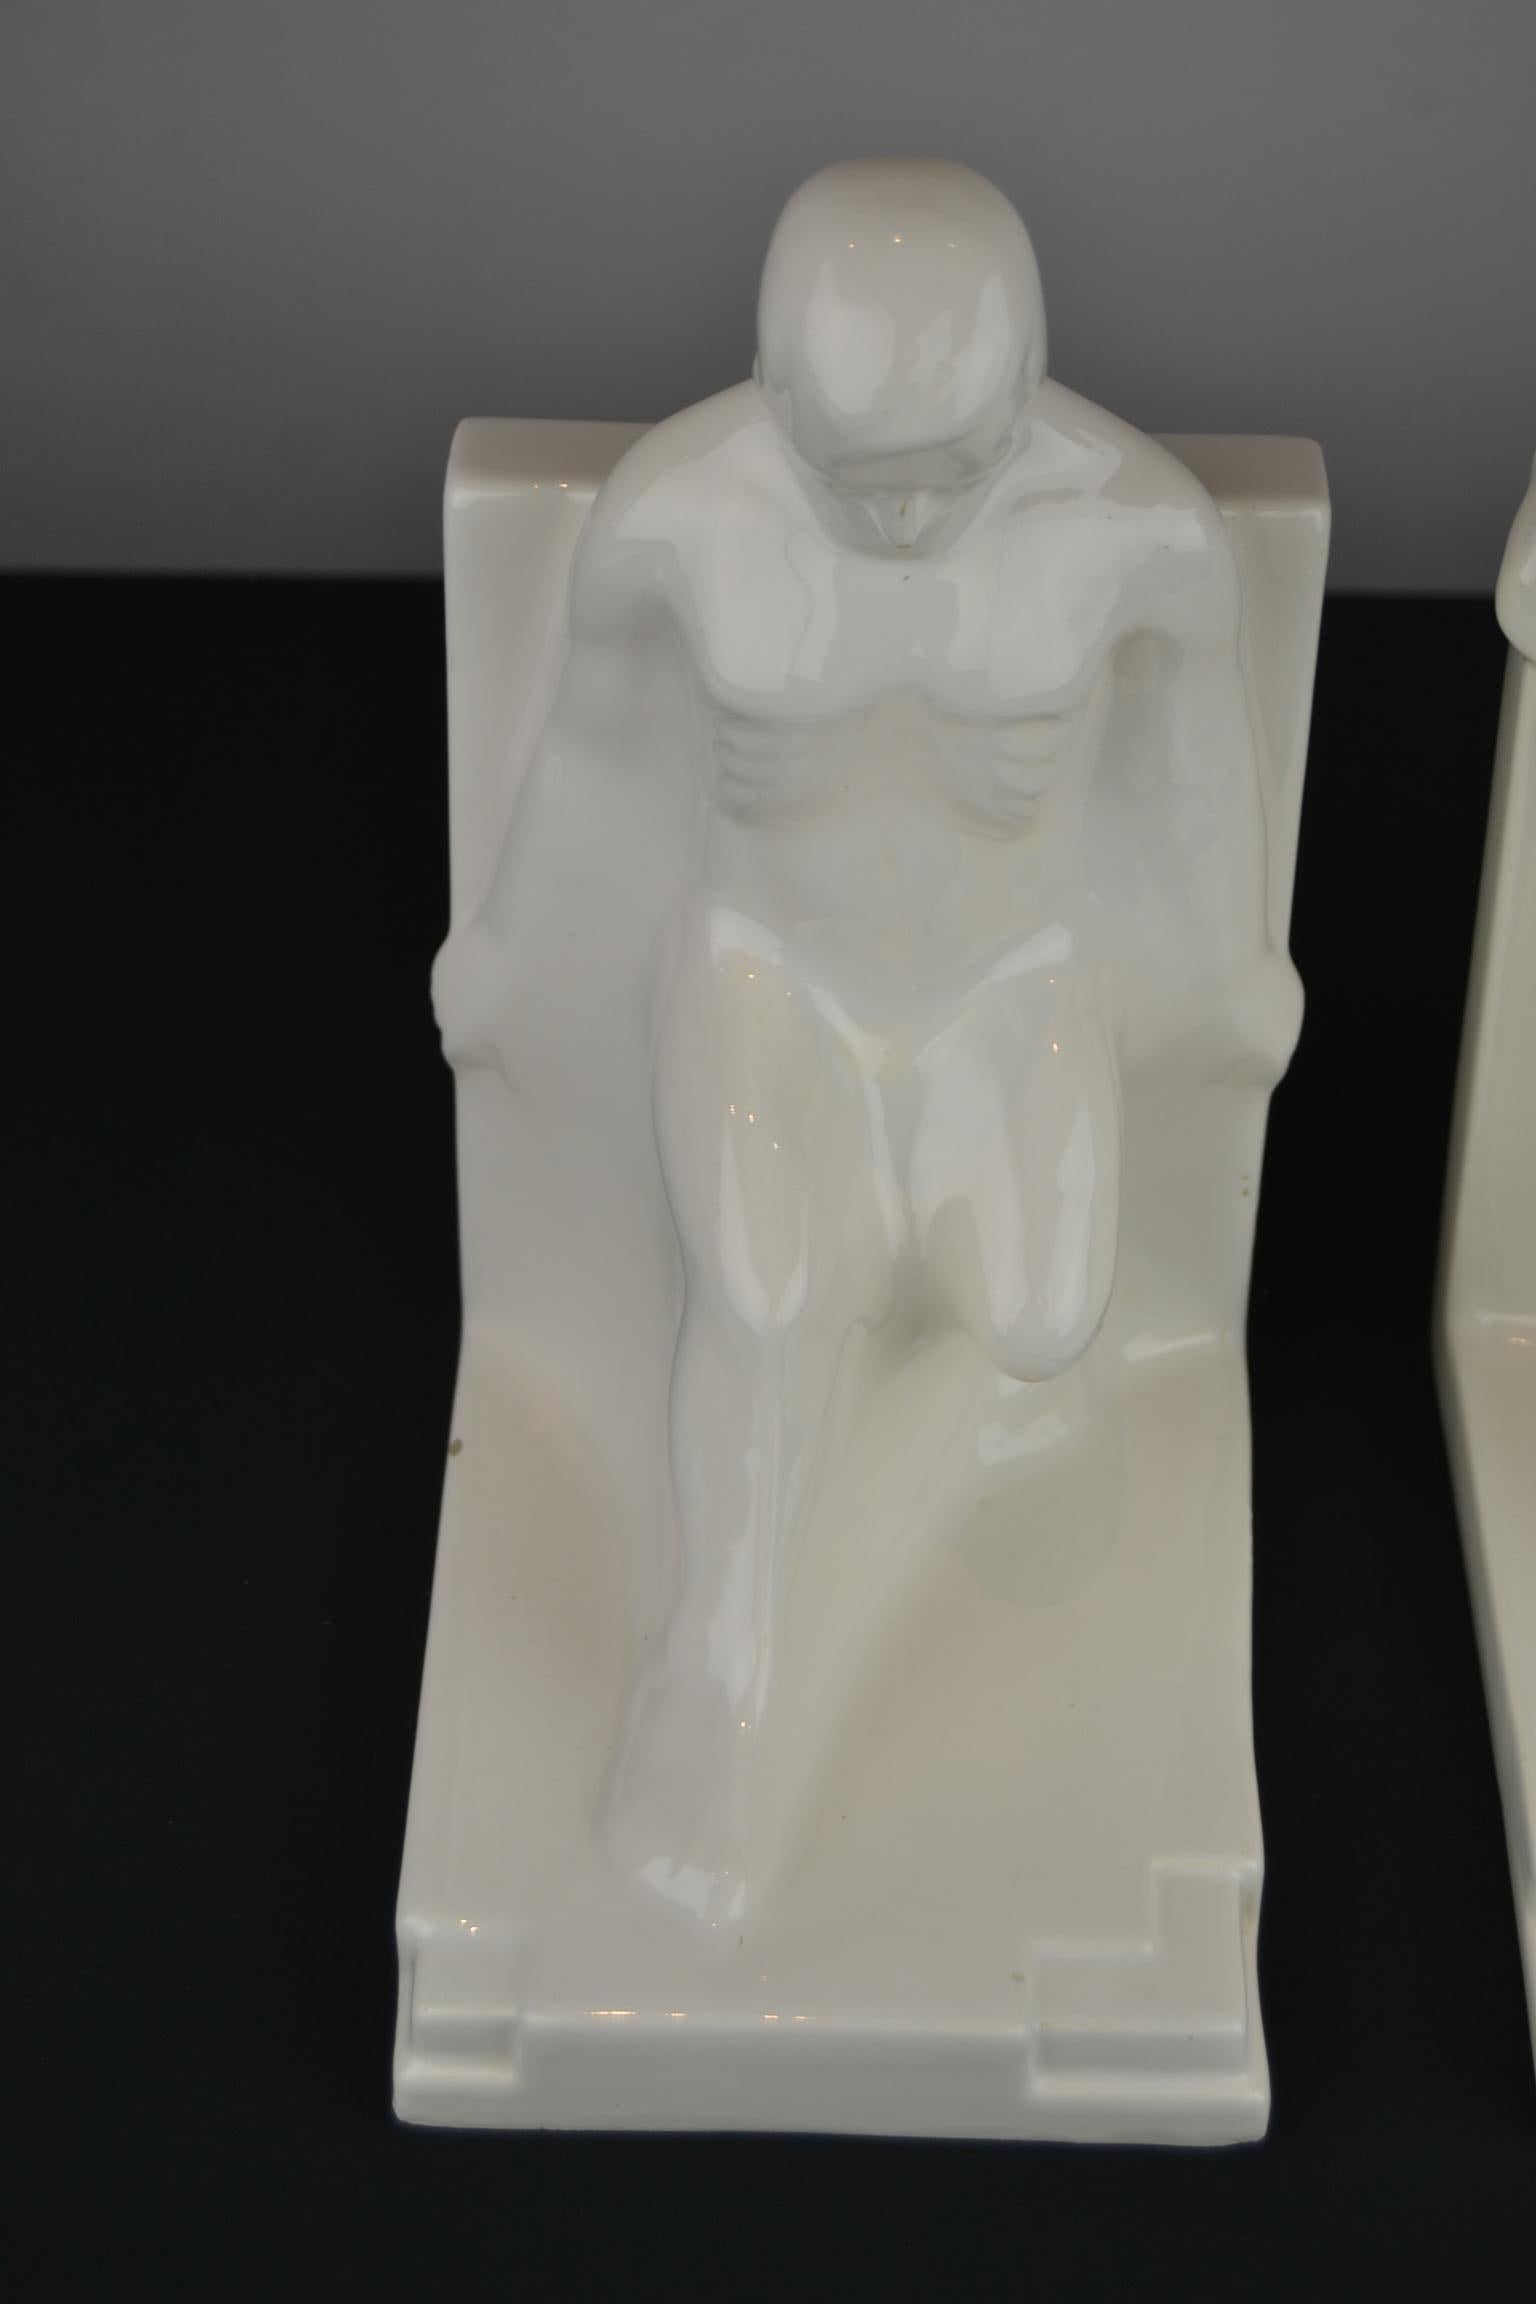 Dutch Large Art Deco Bookends with Nude Muscular Males in White Glazed Ceramic